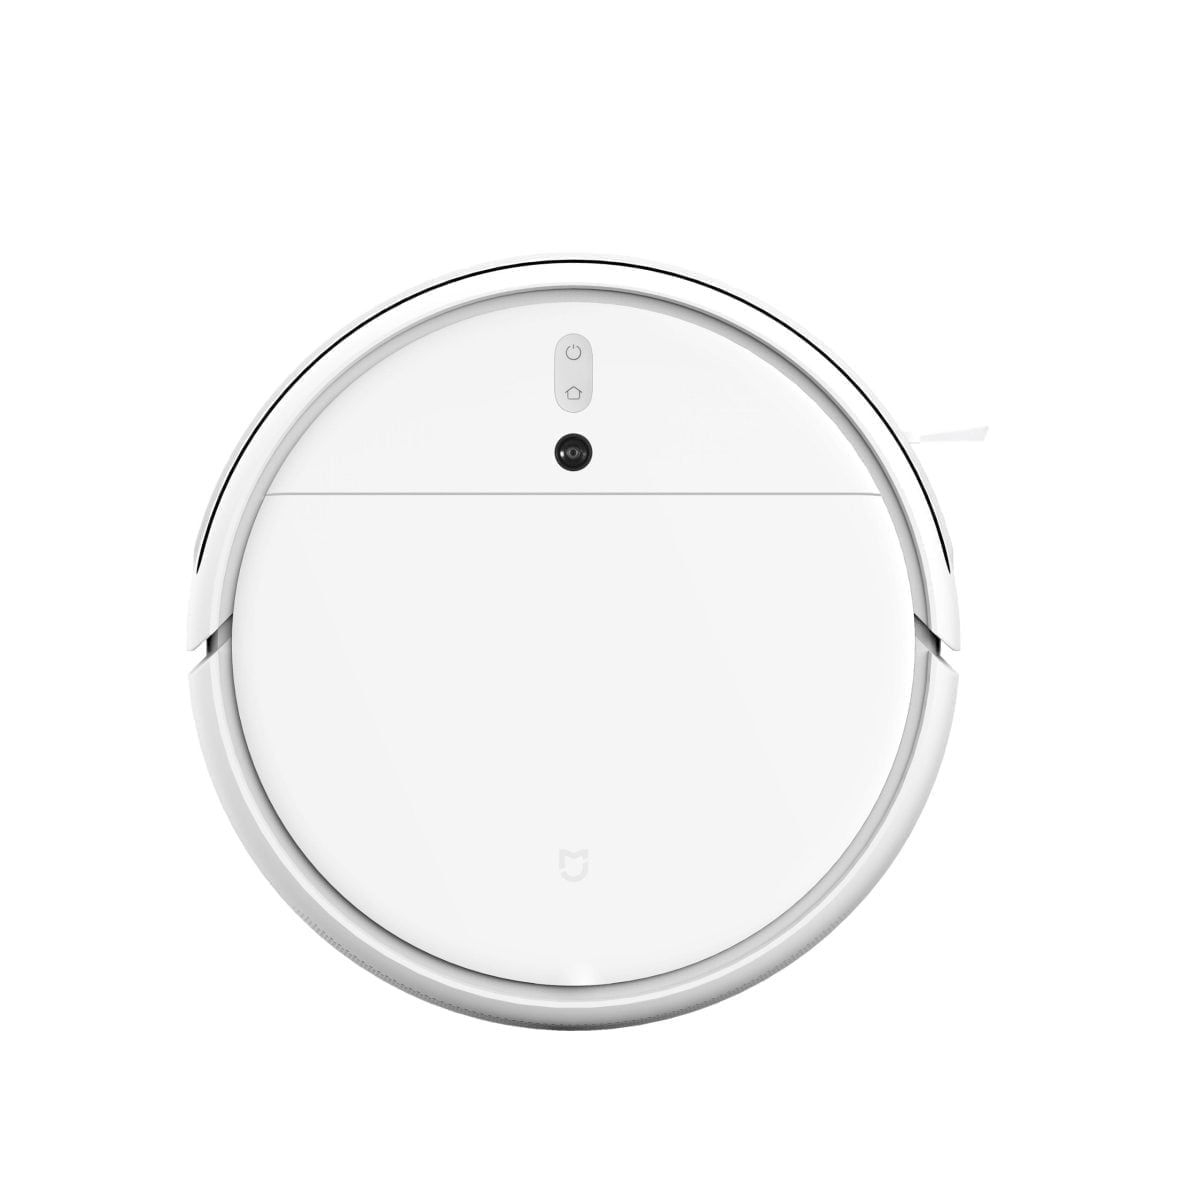 175597873 Origpic A7Fa89 1 Scaled Xiaomi &Amp;Lt;Div Id=&Amp;Quot;Product-Description-Short-979&Amp;Quot; Class=&Amp;Quot;Product-Description-Short&Amp;Quot;&Amp;Gt; Unique Robotic Vacuum Cleaner For A Great Price, Wet And Dry Cleaning, Wi-Fi Connection, Vslam Route Planning, Suction Power Up To 2500 Pa, Application Control, Hepa Filter And Much More. Https://Youtu.be/Ychdmp-Pa7O &Amp;Lt;/Div&Amp;Gt; Xiaomi Mi Robot Vacuum-Mop Xiaomi Mi Robot Vacuum-Mop